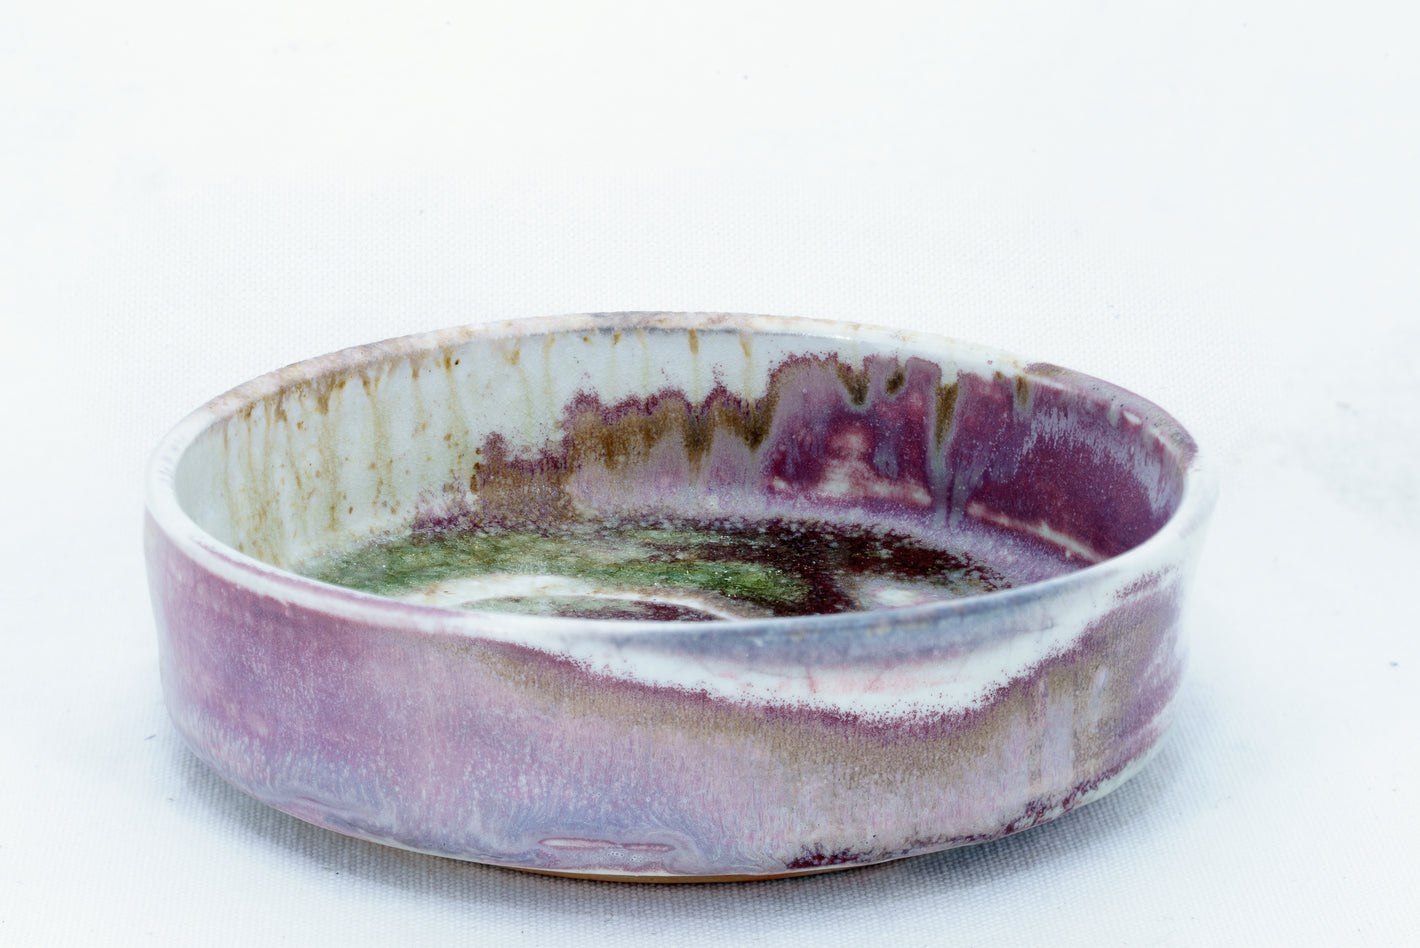 Wood fired Maggie Connolly Ceramics